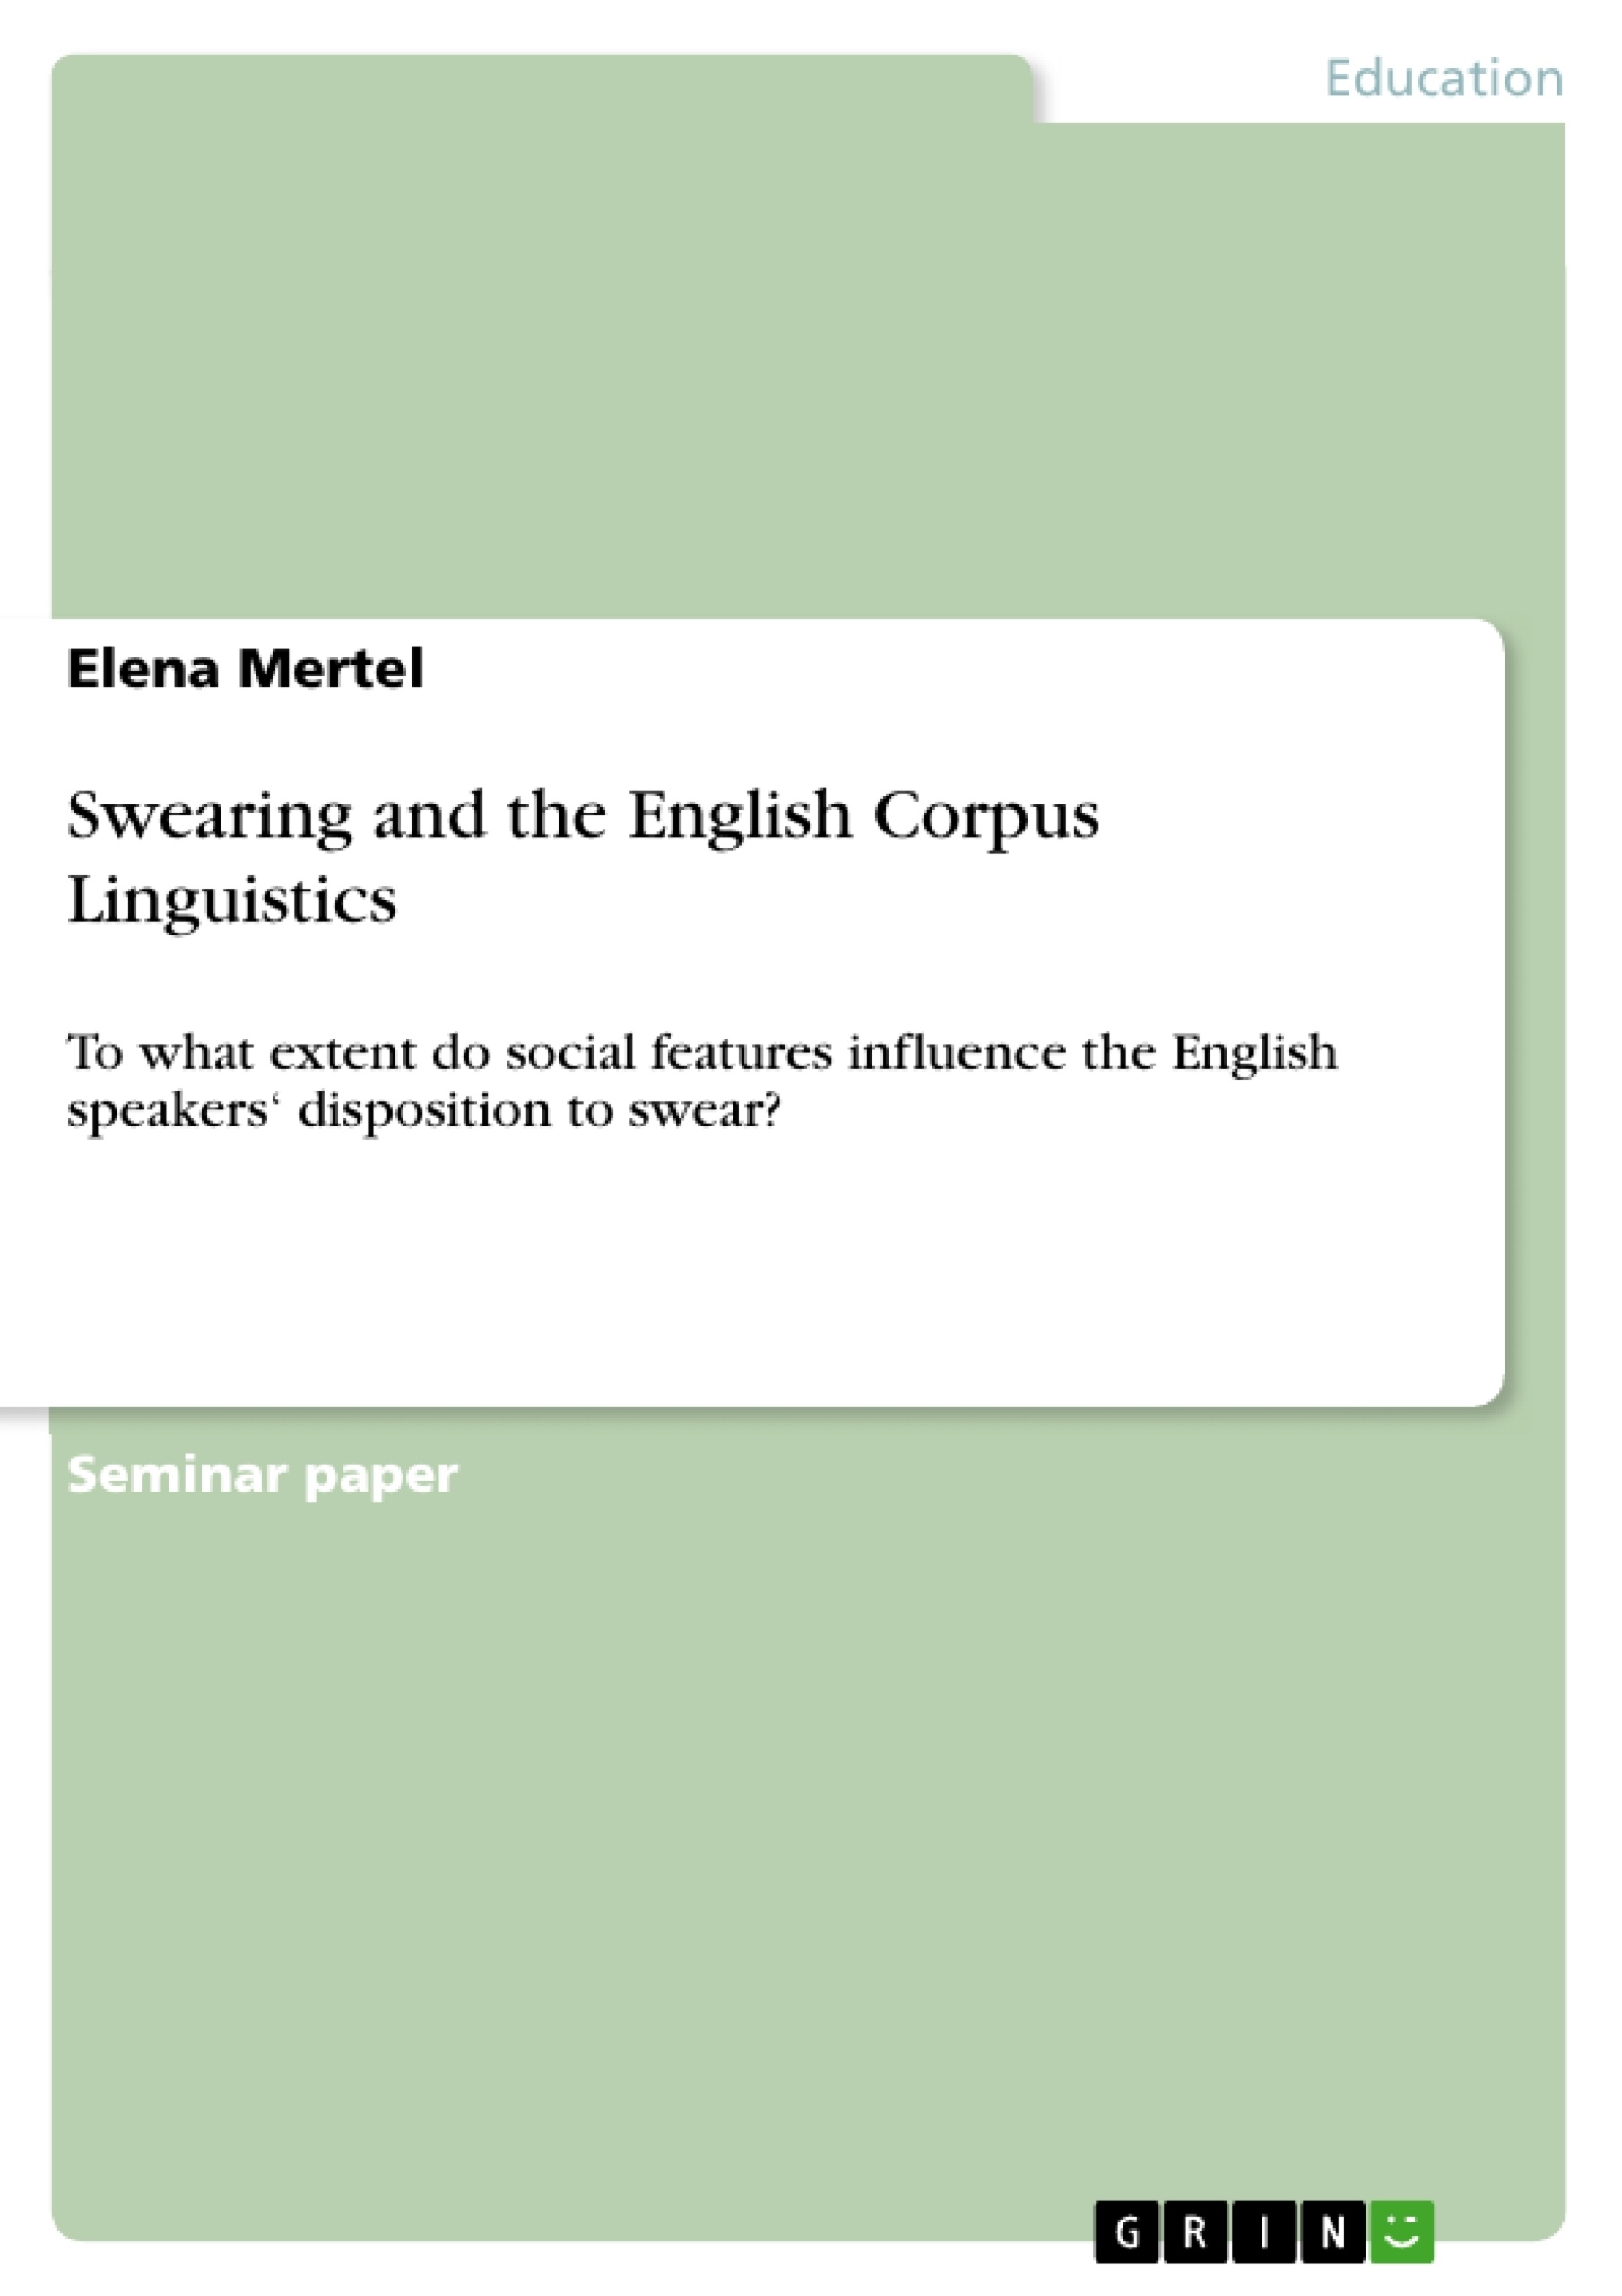 Title: Swearing and the English Corpus Linguistics